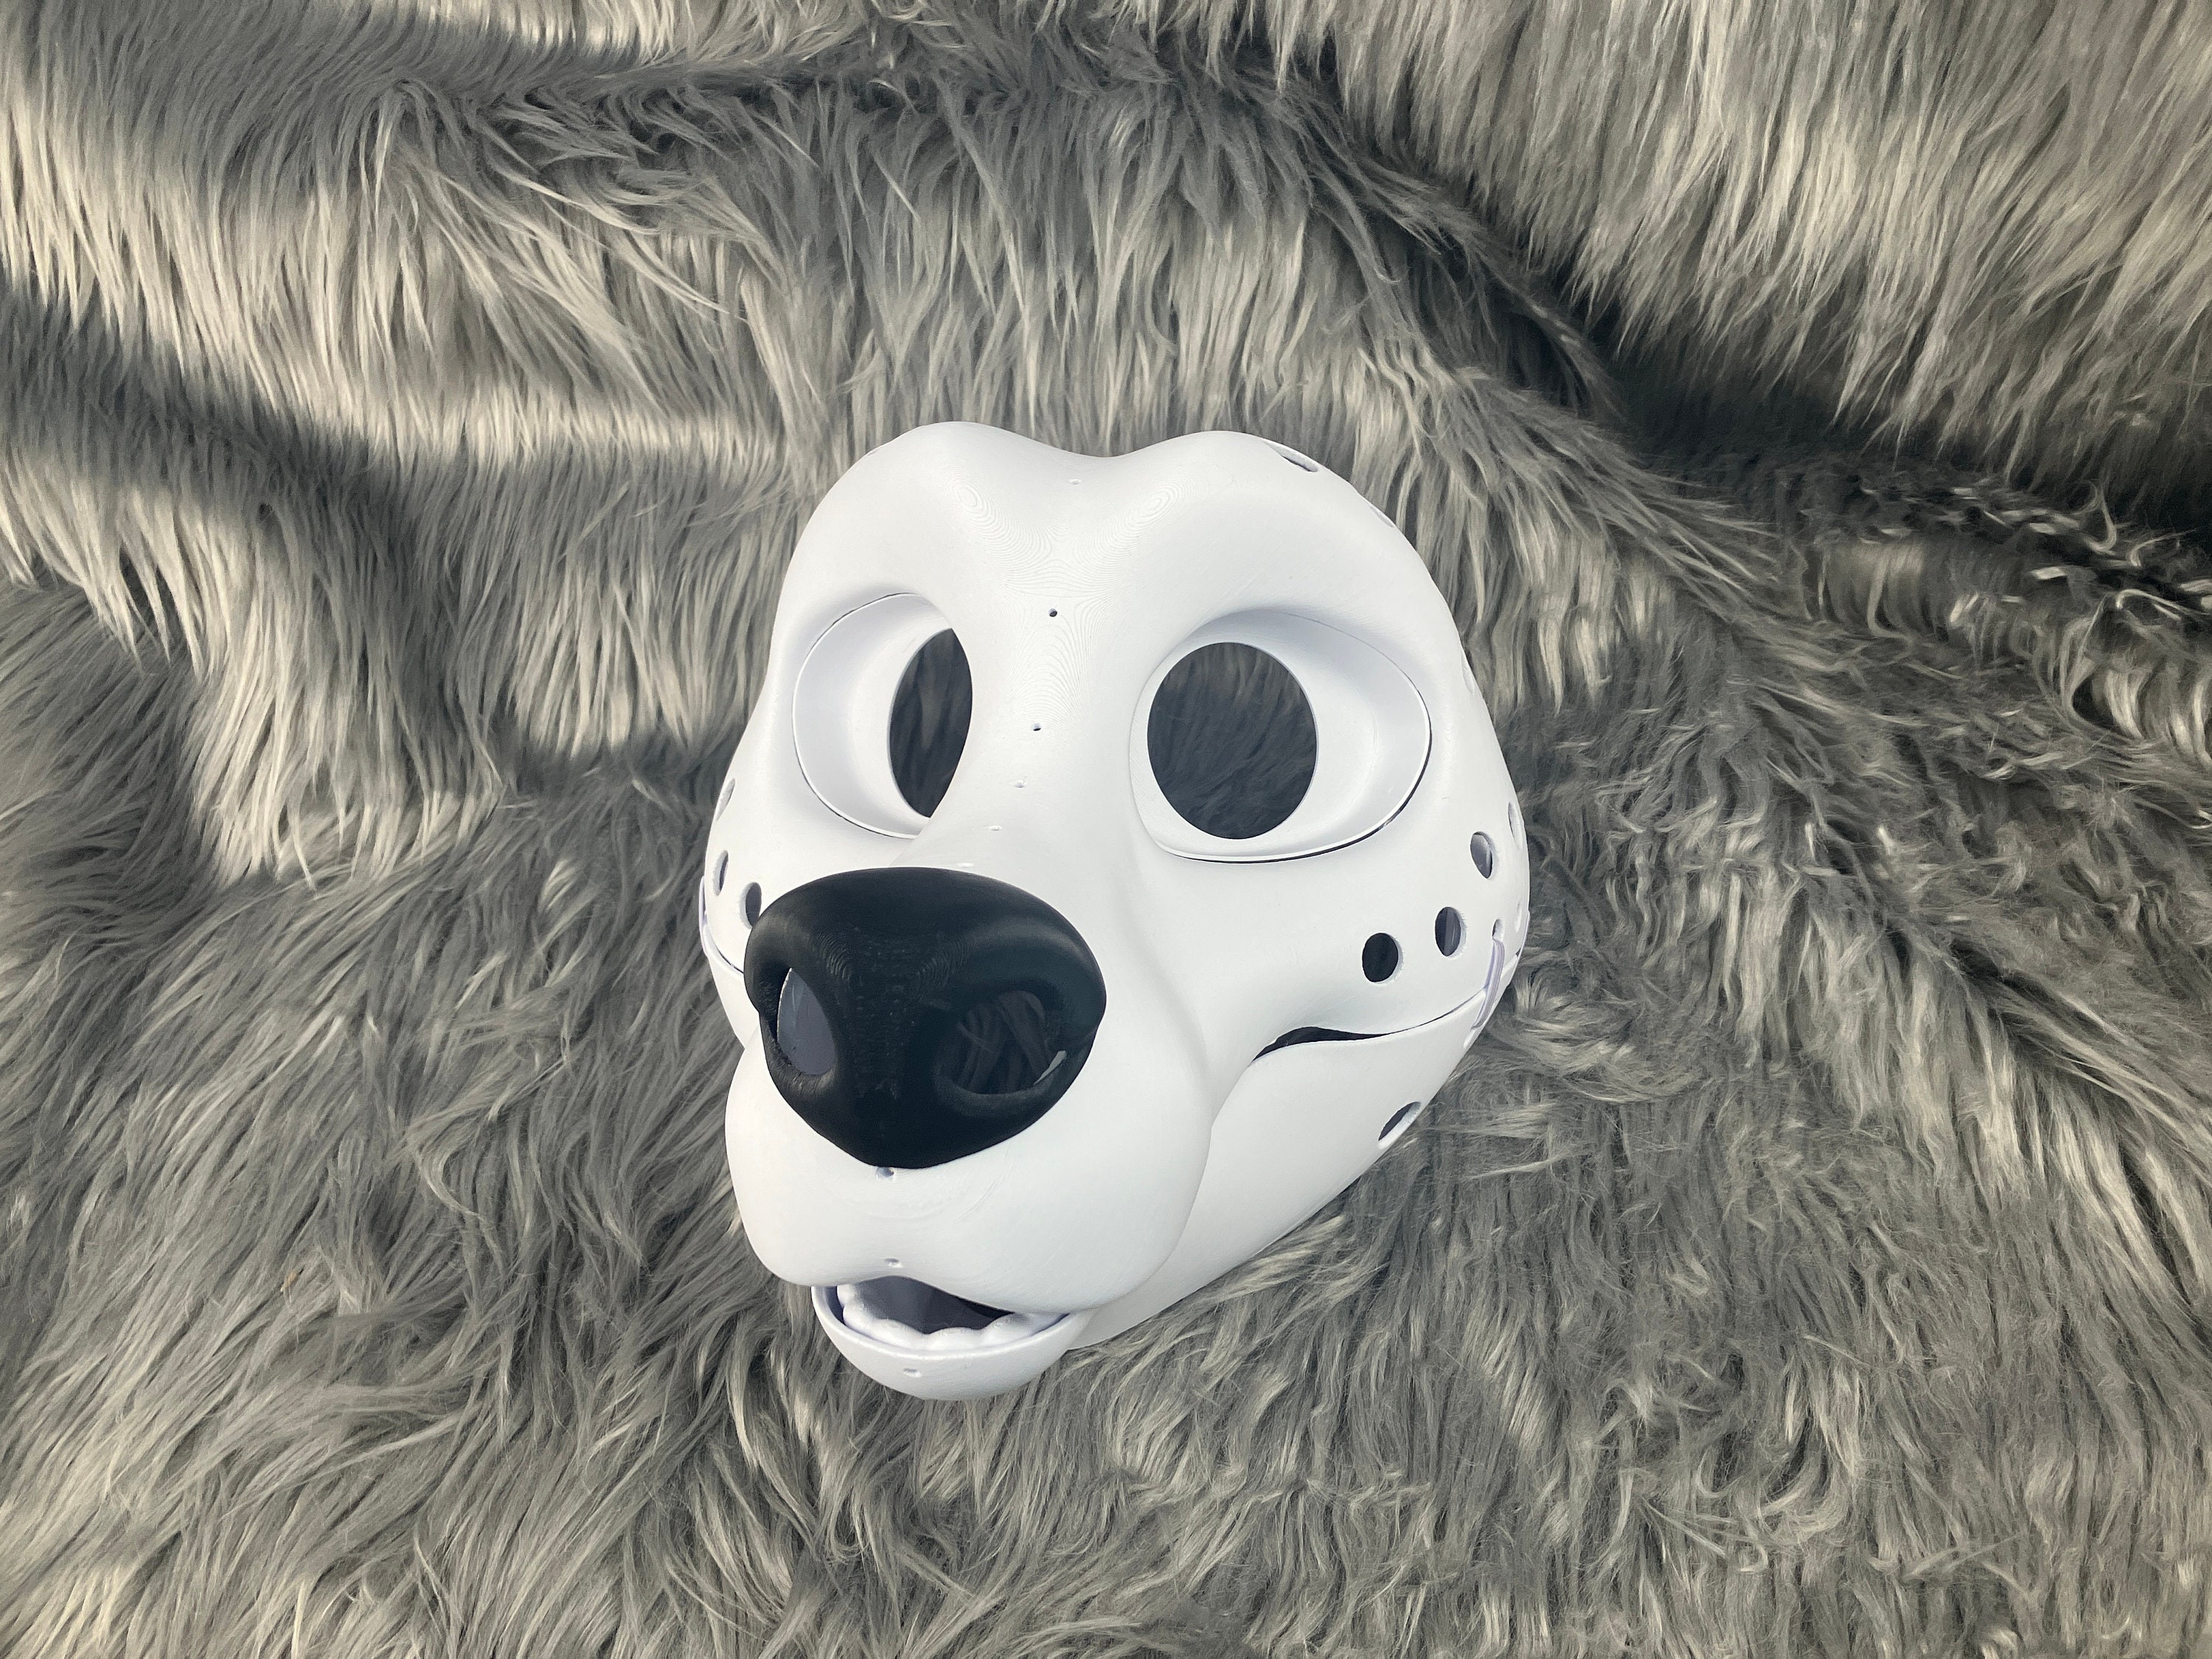 Rose, Furry Fursuit Foam Half Head Base for Fursuiting, for Furries and  Cosplay DIY Fhb14 